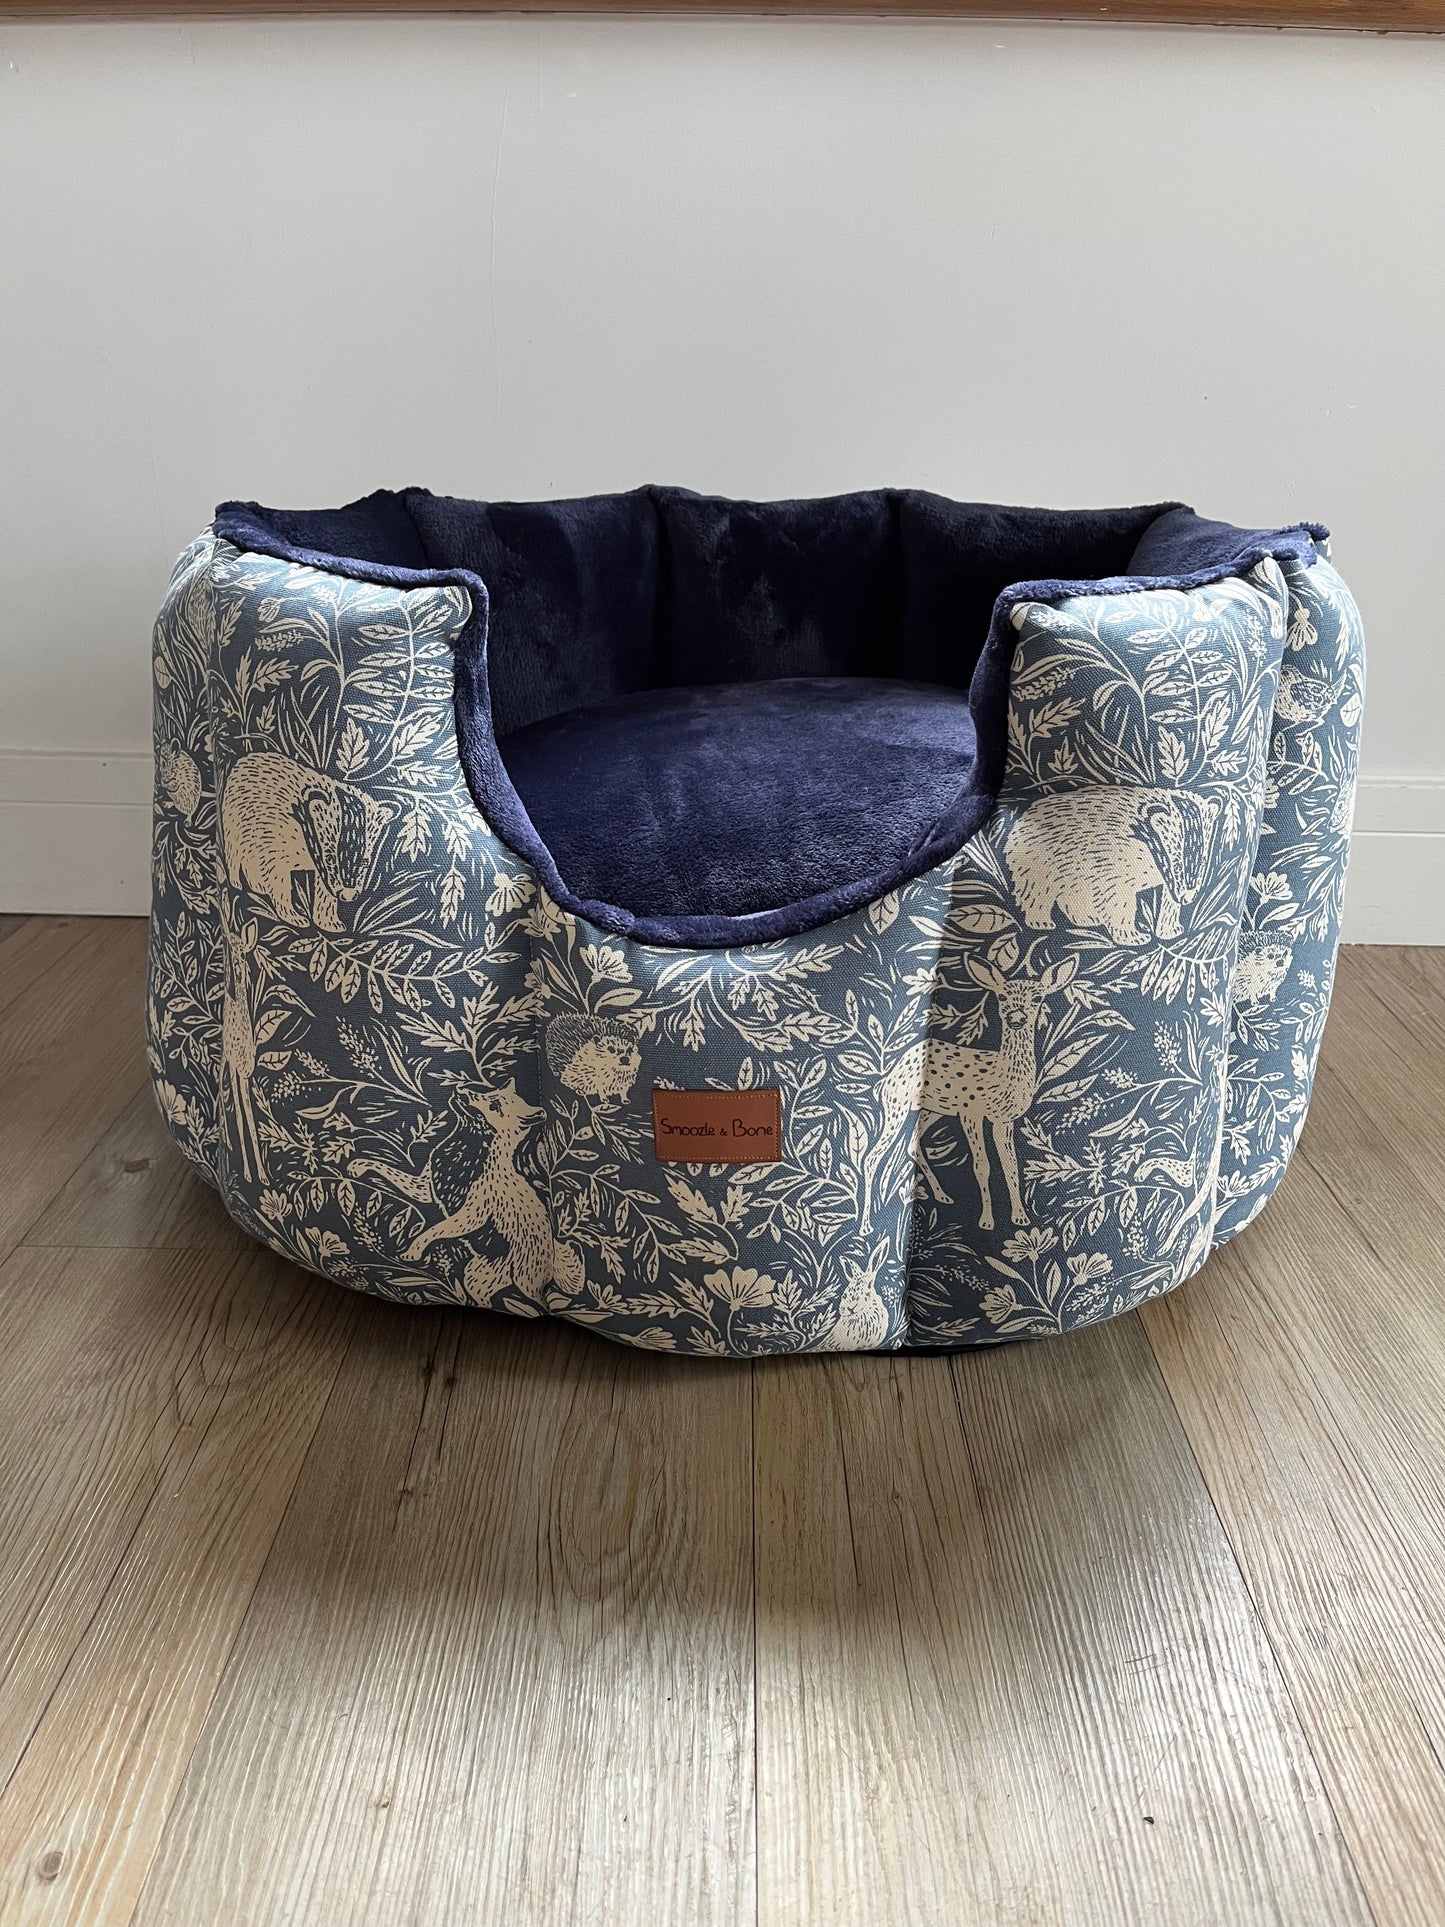 Woodland Friends Hand-Made Cave Dog Bed